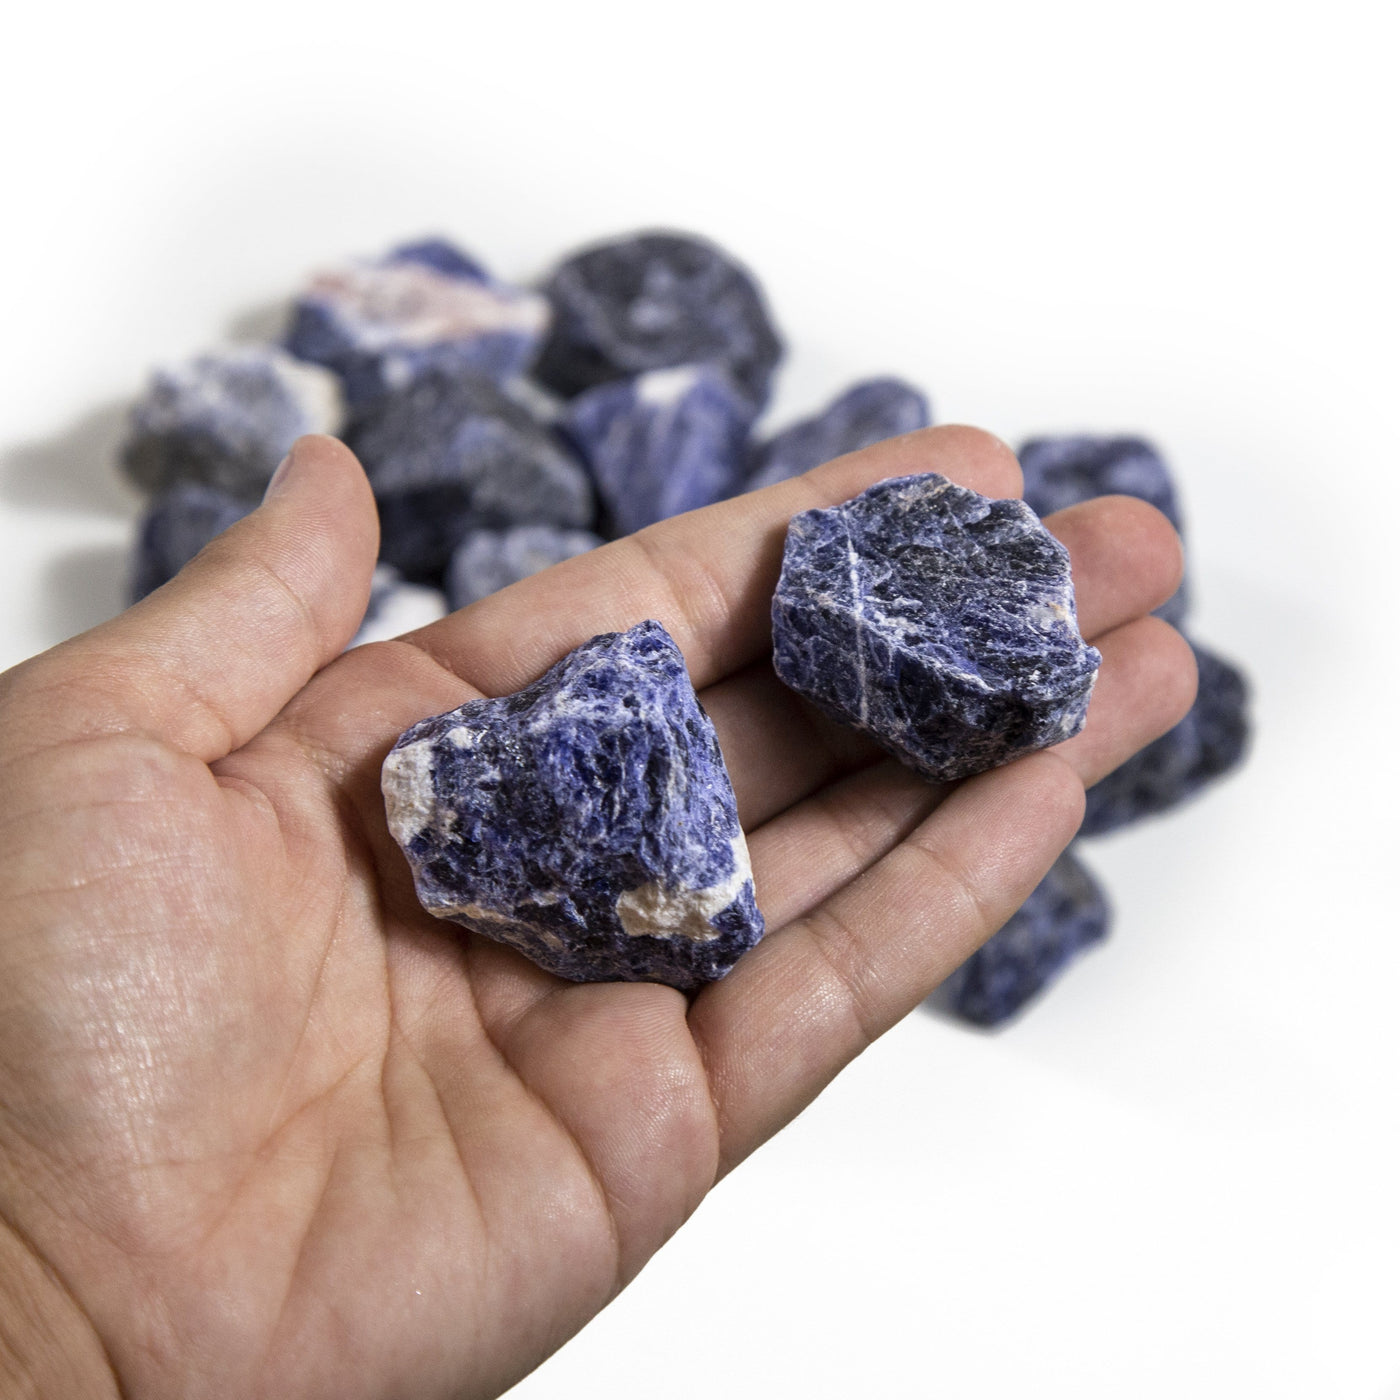 two sodalite rough stones in hand for size reference and possible variations with many others in a pile on white background